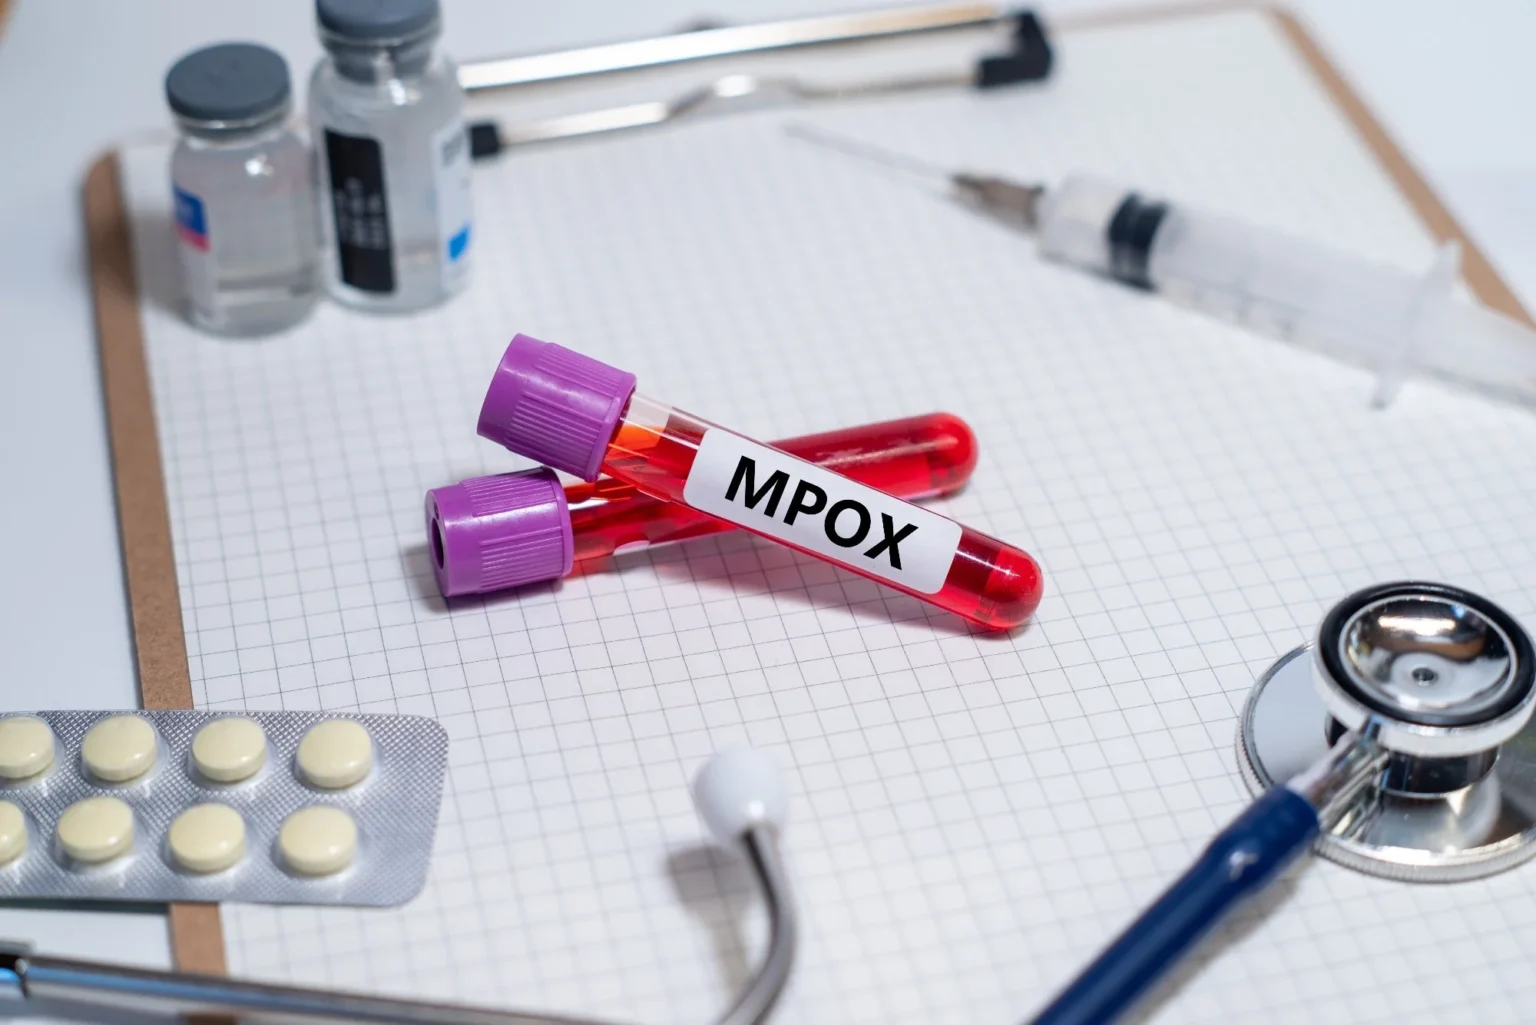 south-africa-records-first-death-from-mpox-after-five-confirmed-cases